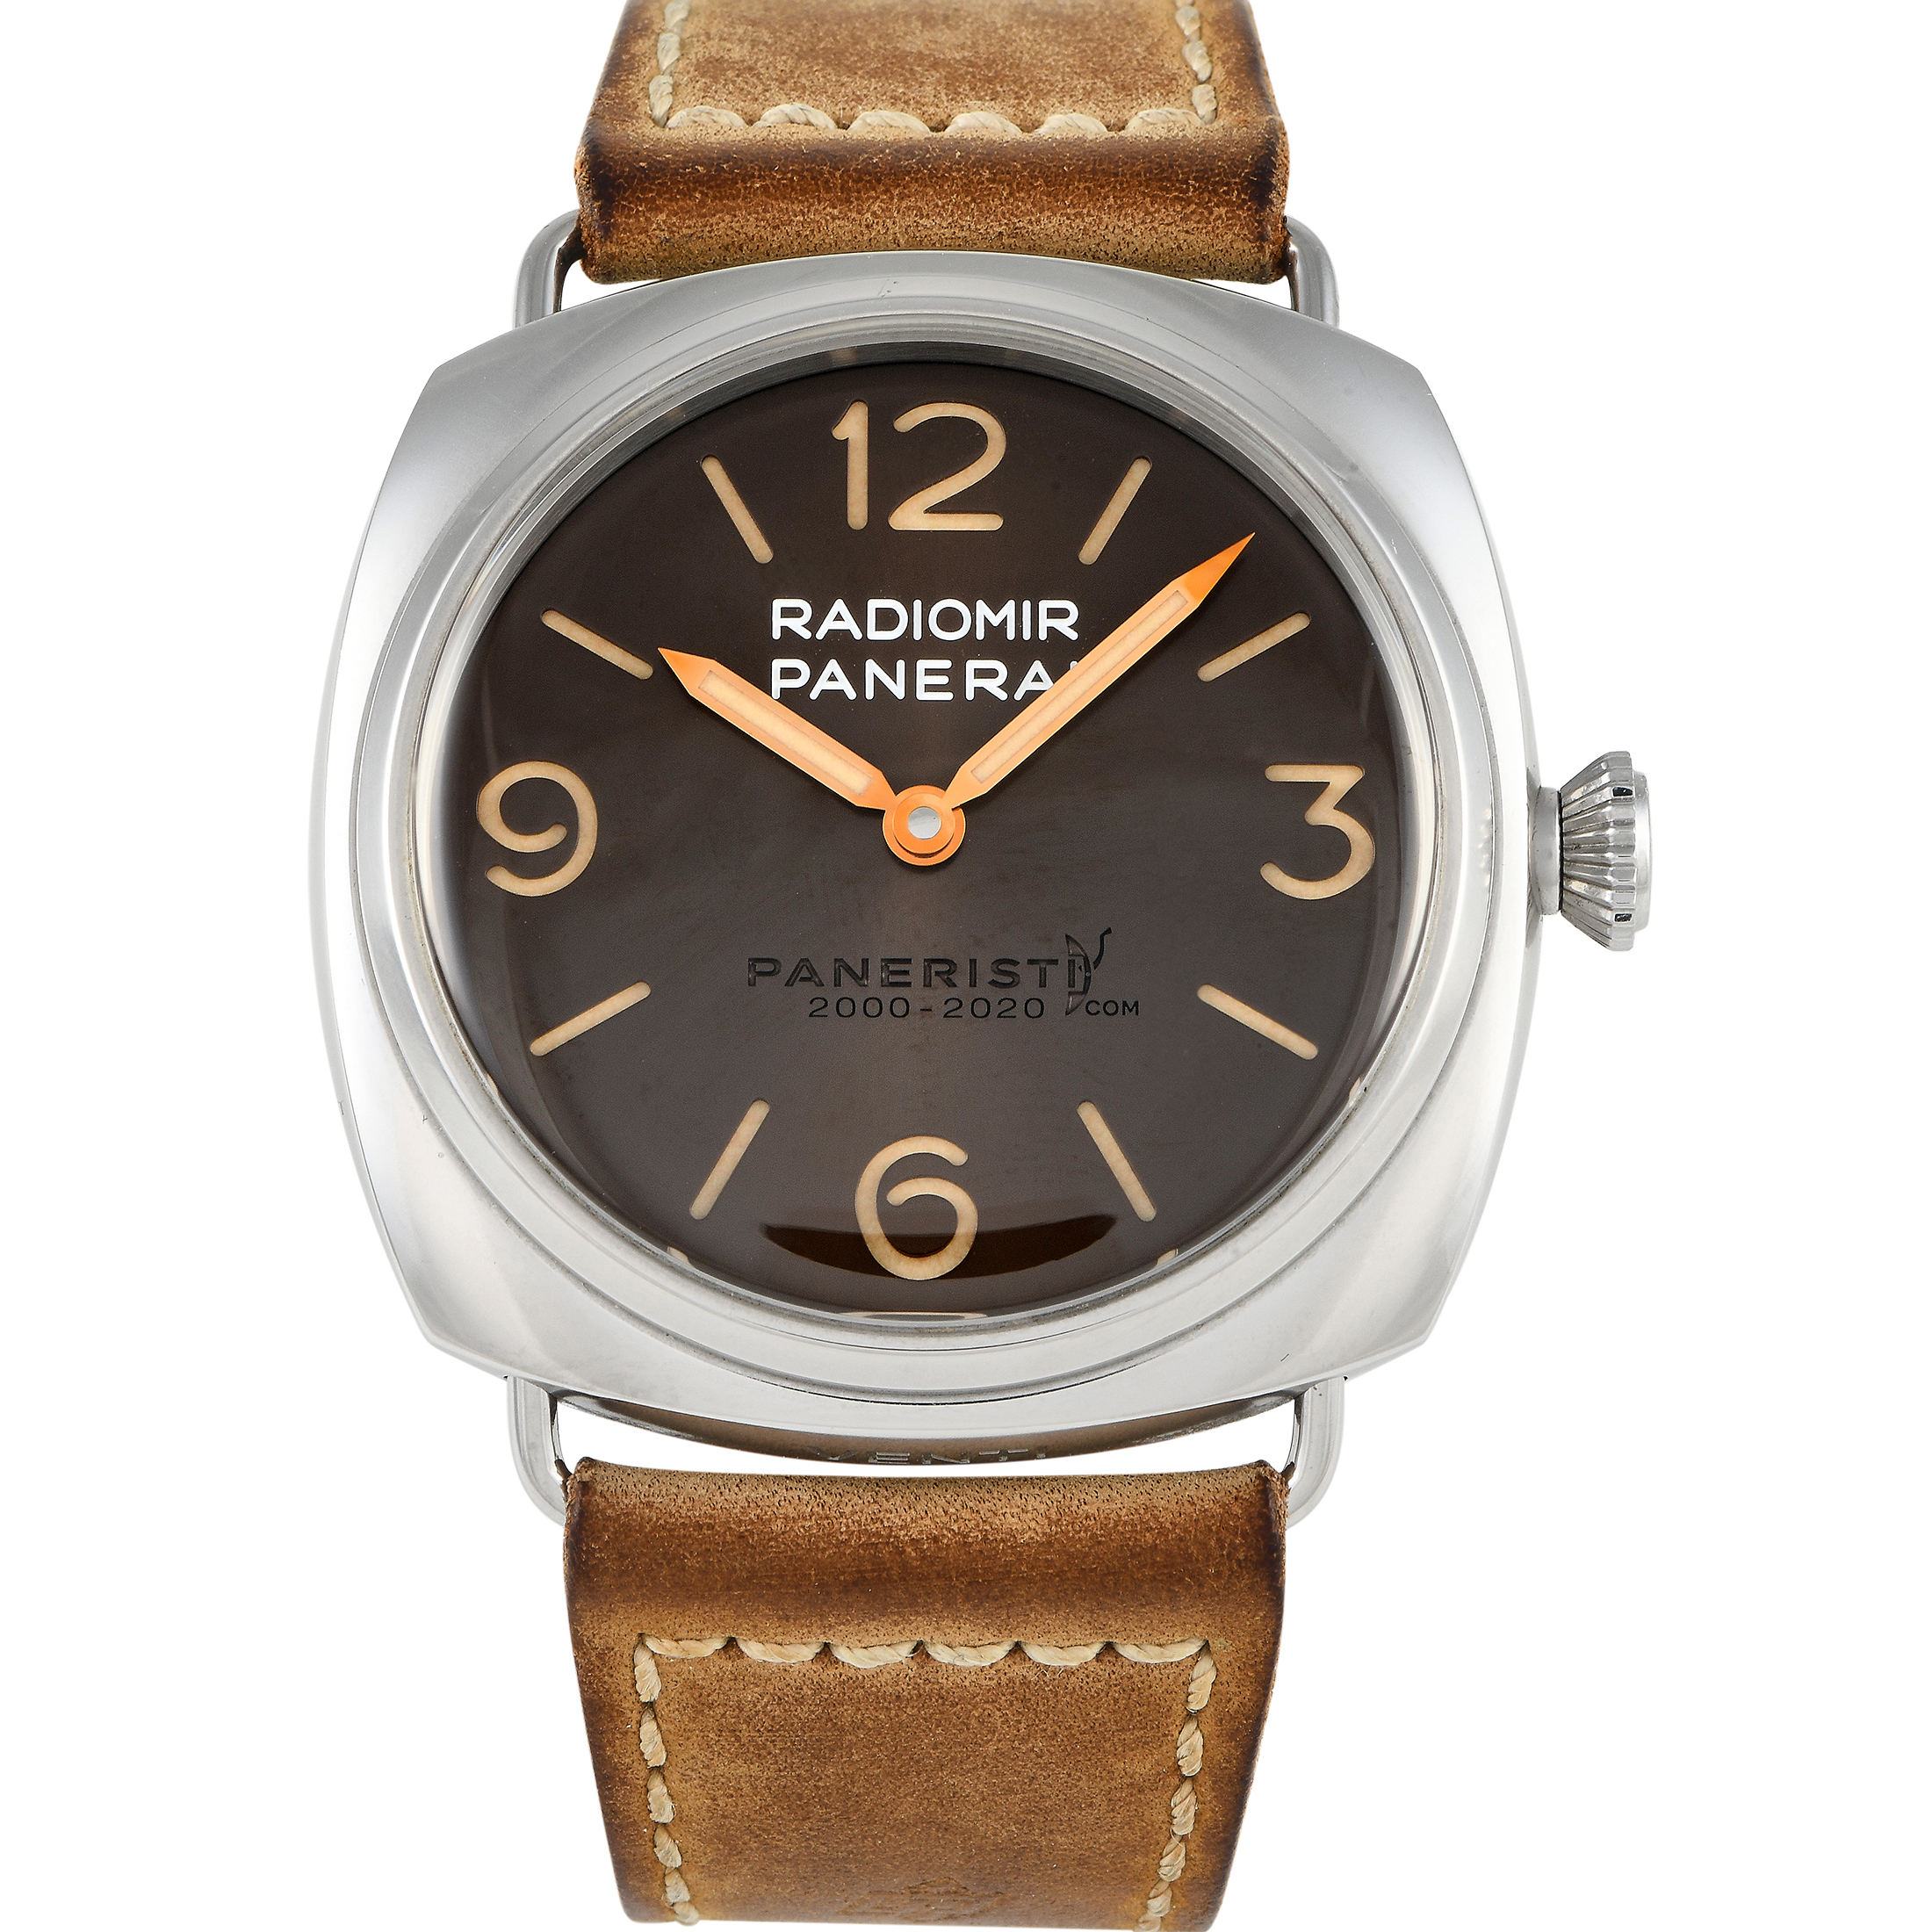 Officine Panerai - Yesterday I did a little watch walk, and I visited the  Panerai Boutique...